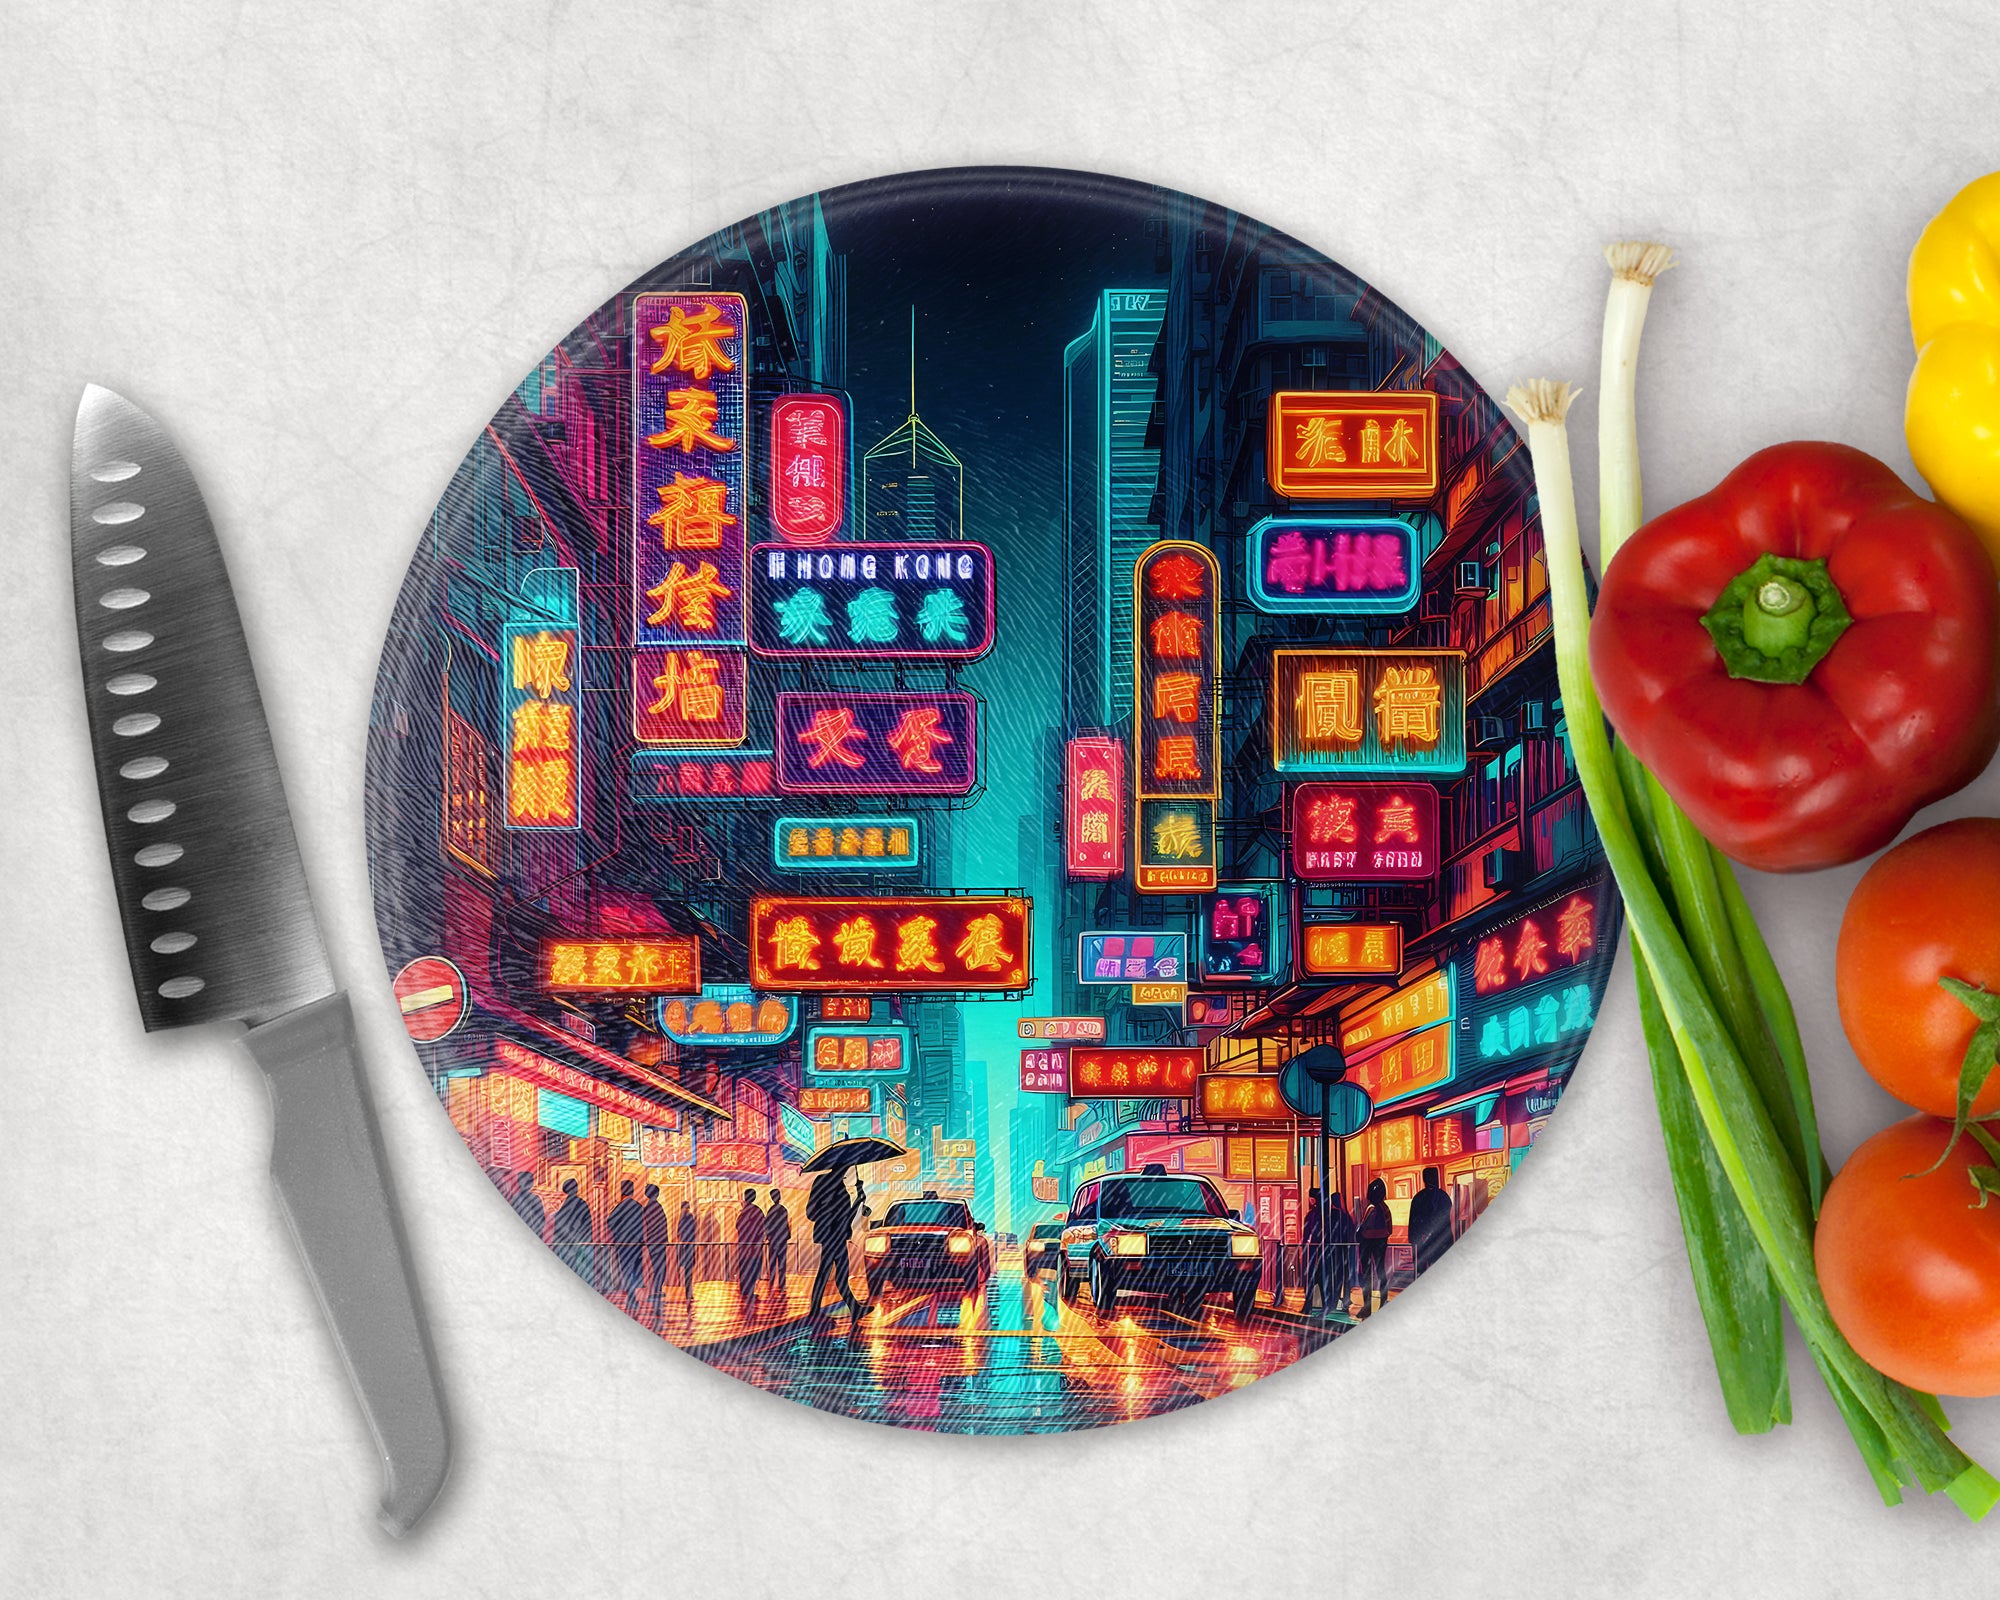 Hong Kong Night Time Neon Round Glass Cutting / Serving Board